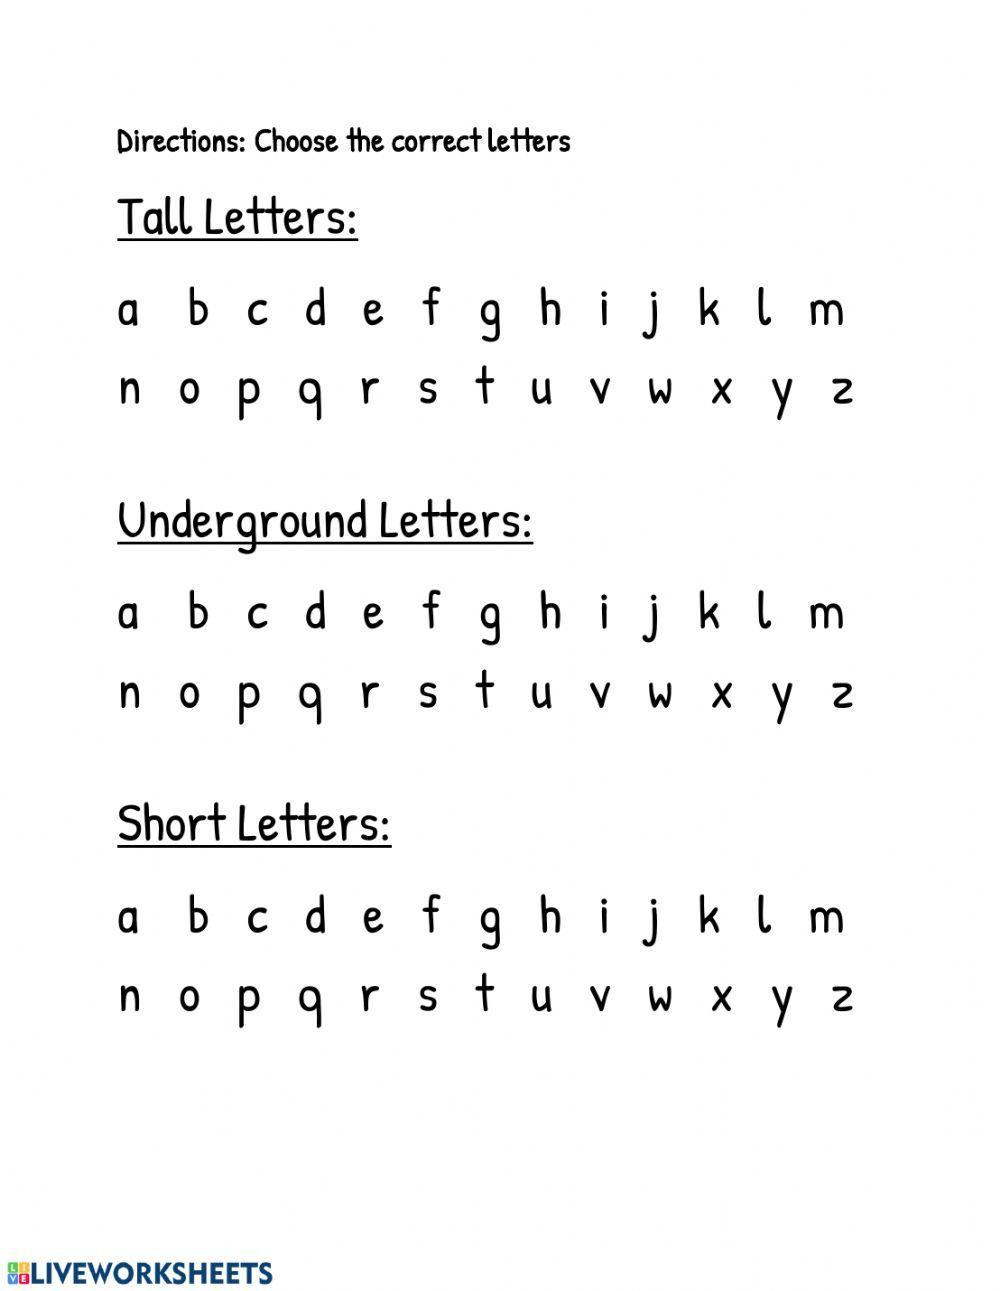 Identifying Tall, Short, and Underground Letters